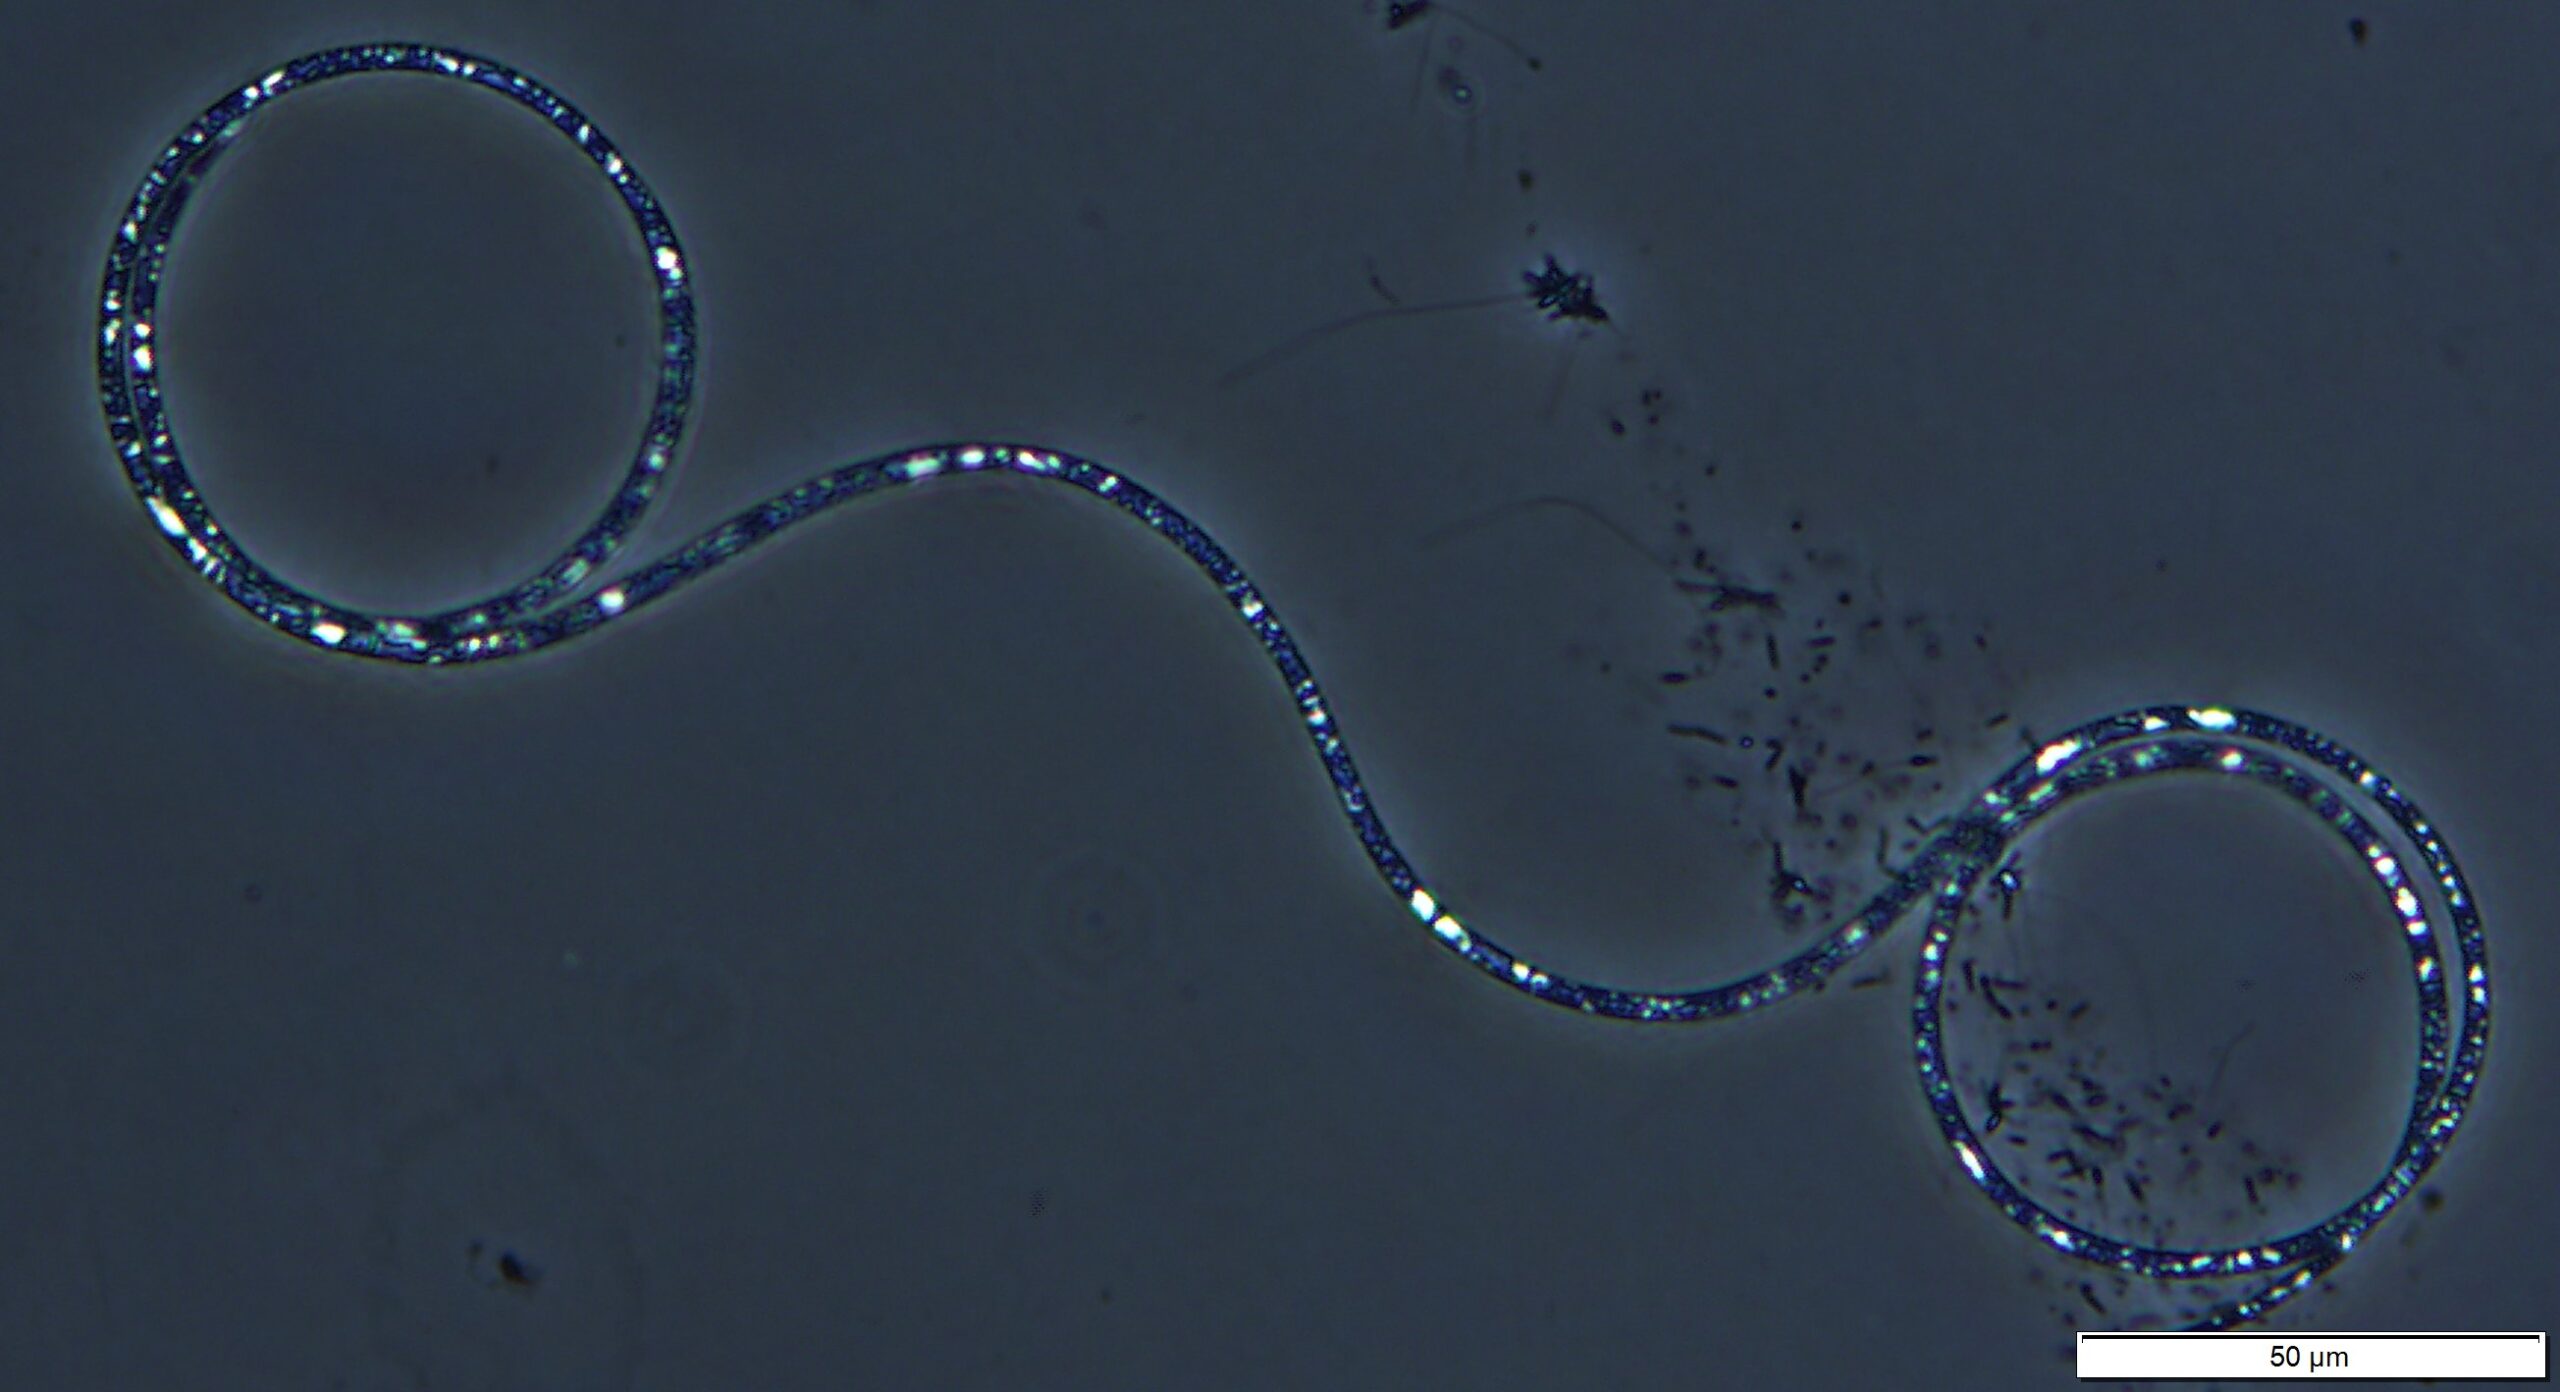 Cylindrospermopsis - Coiled morphology